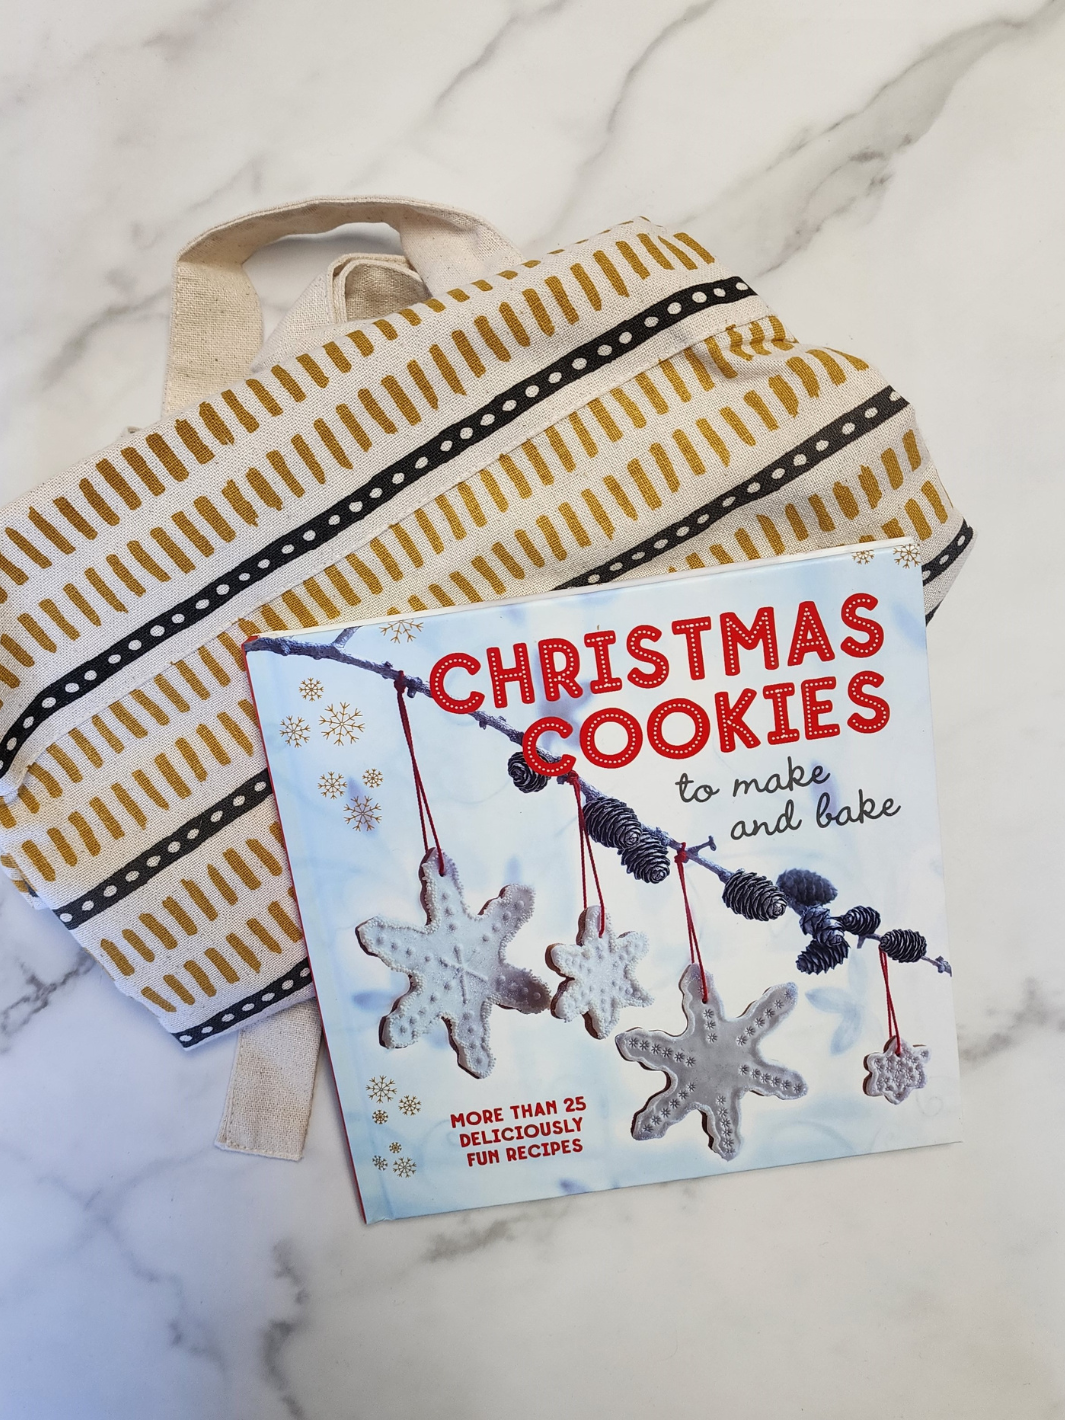 Adult/child apron and Christmas cookies cookbook set